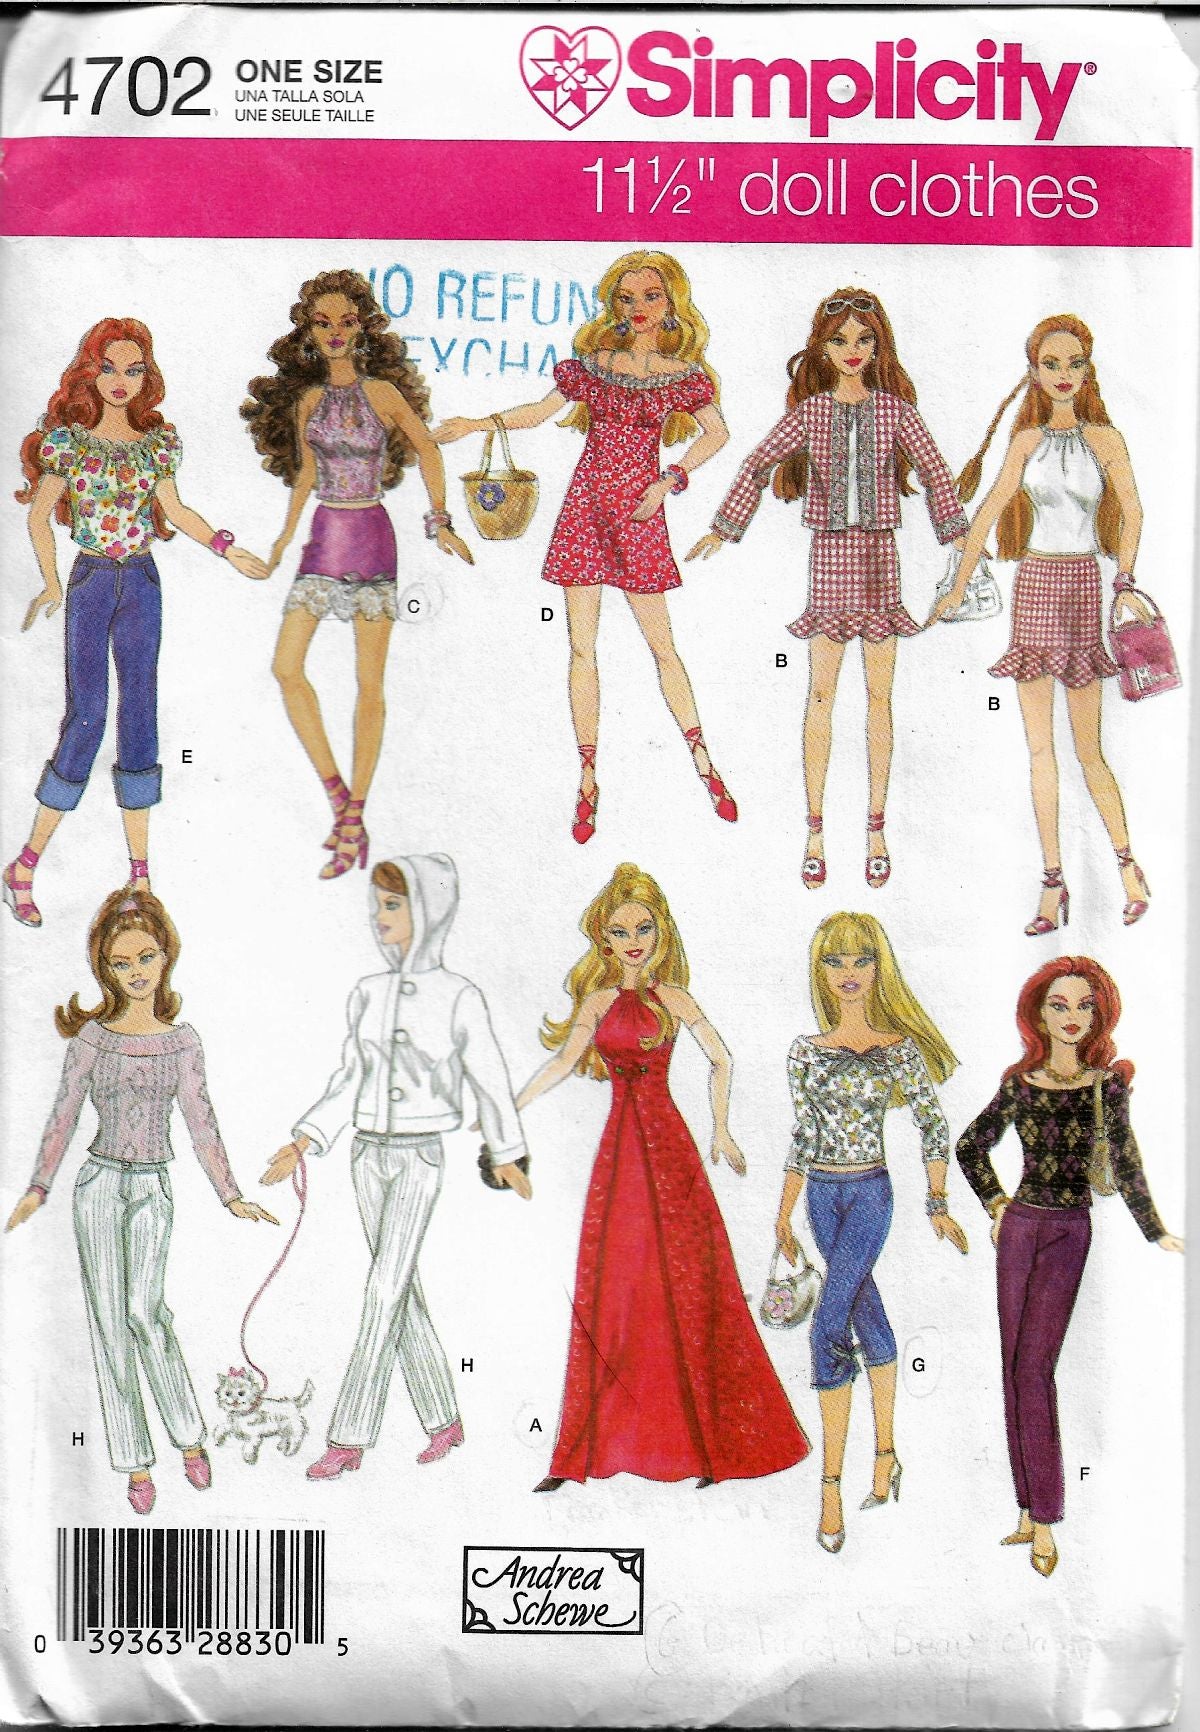 Simplicity 4702 Barbie Doll Clothes Wardrobe Pattern Dress Pants Top